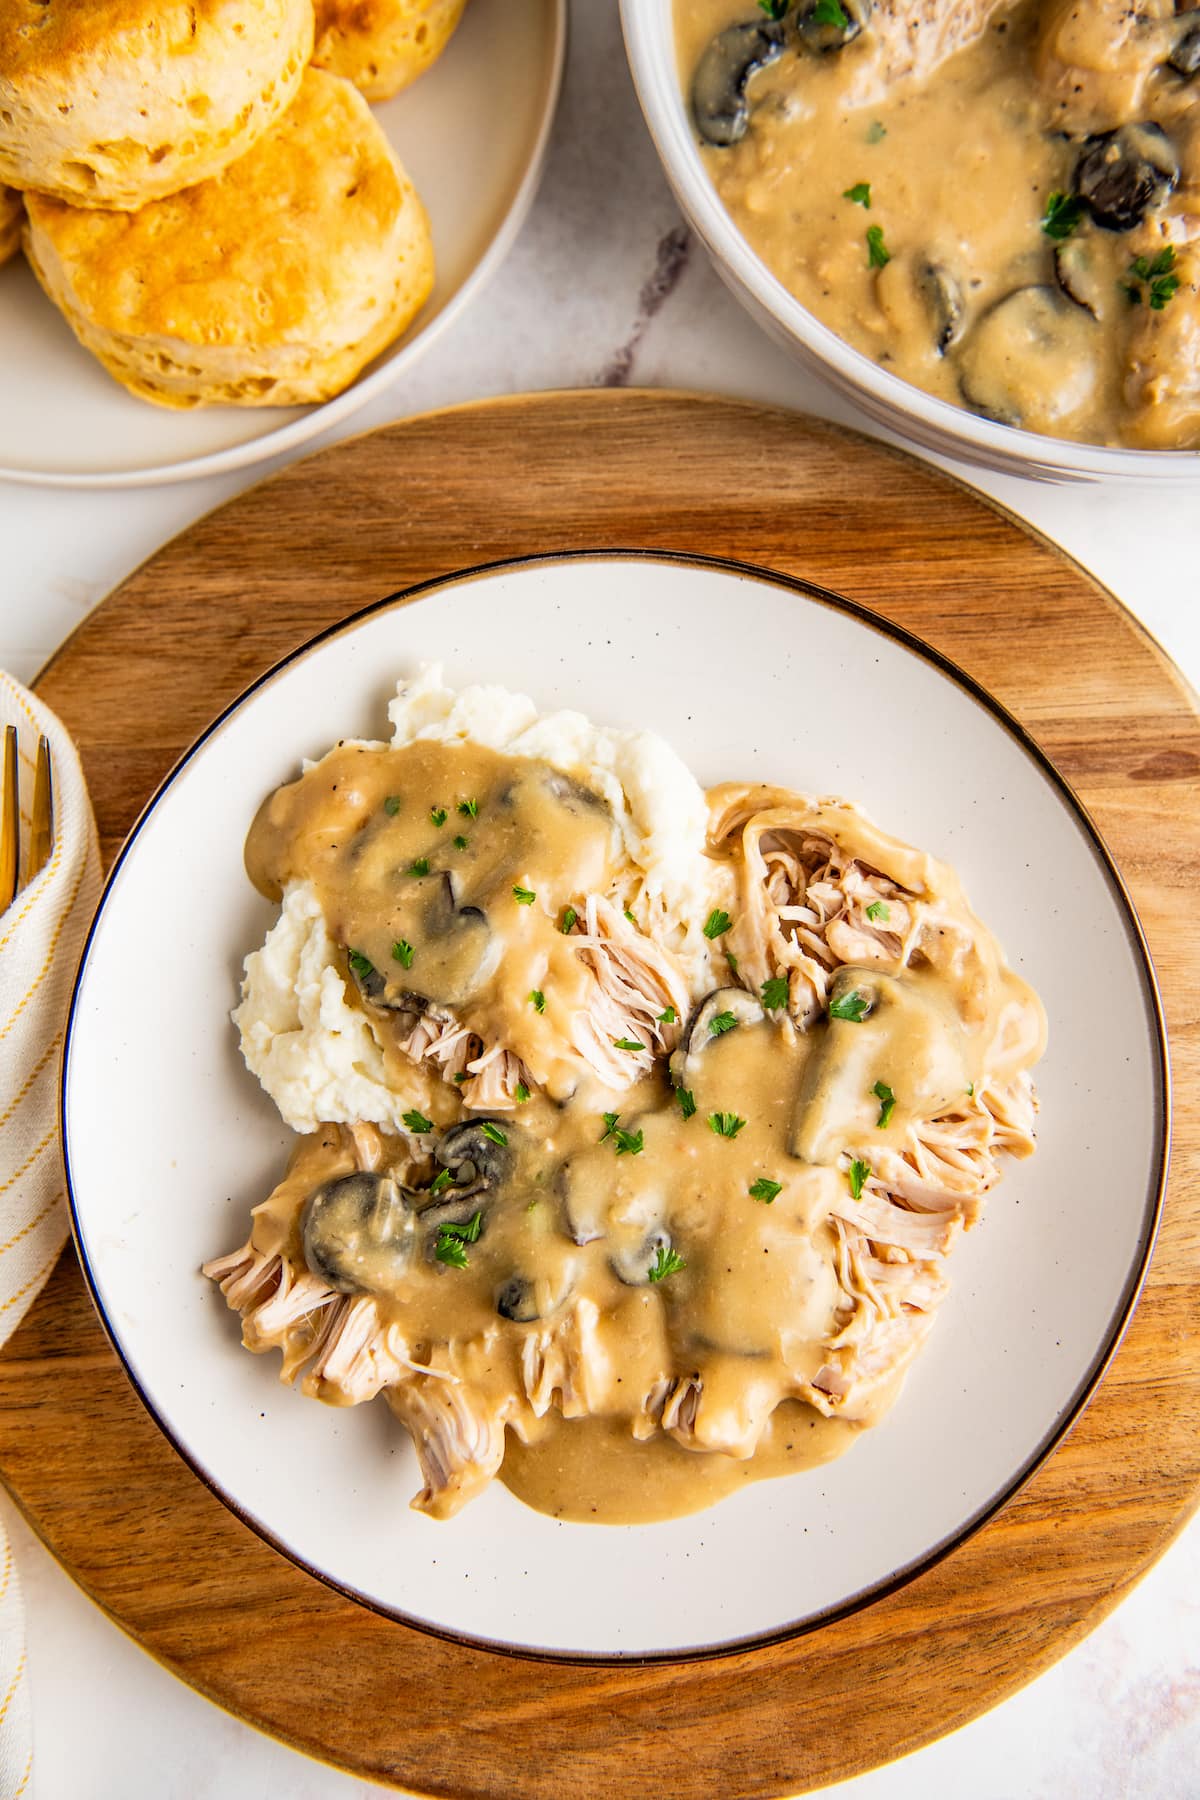 Overhead view of a plate of shredded chicken in gravy, on top of a bed of mashed potatoes